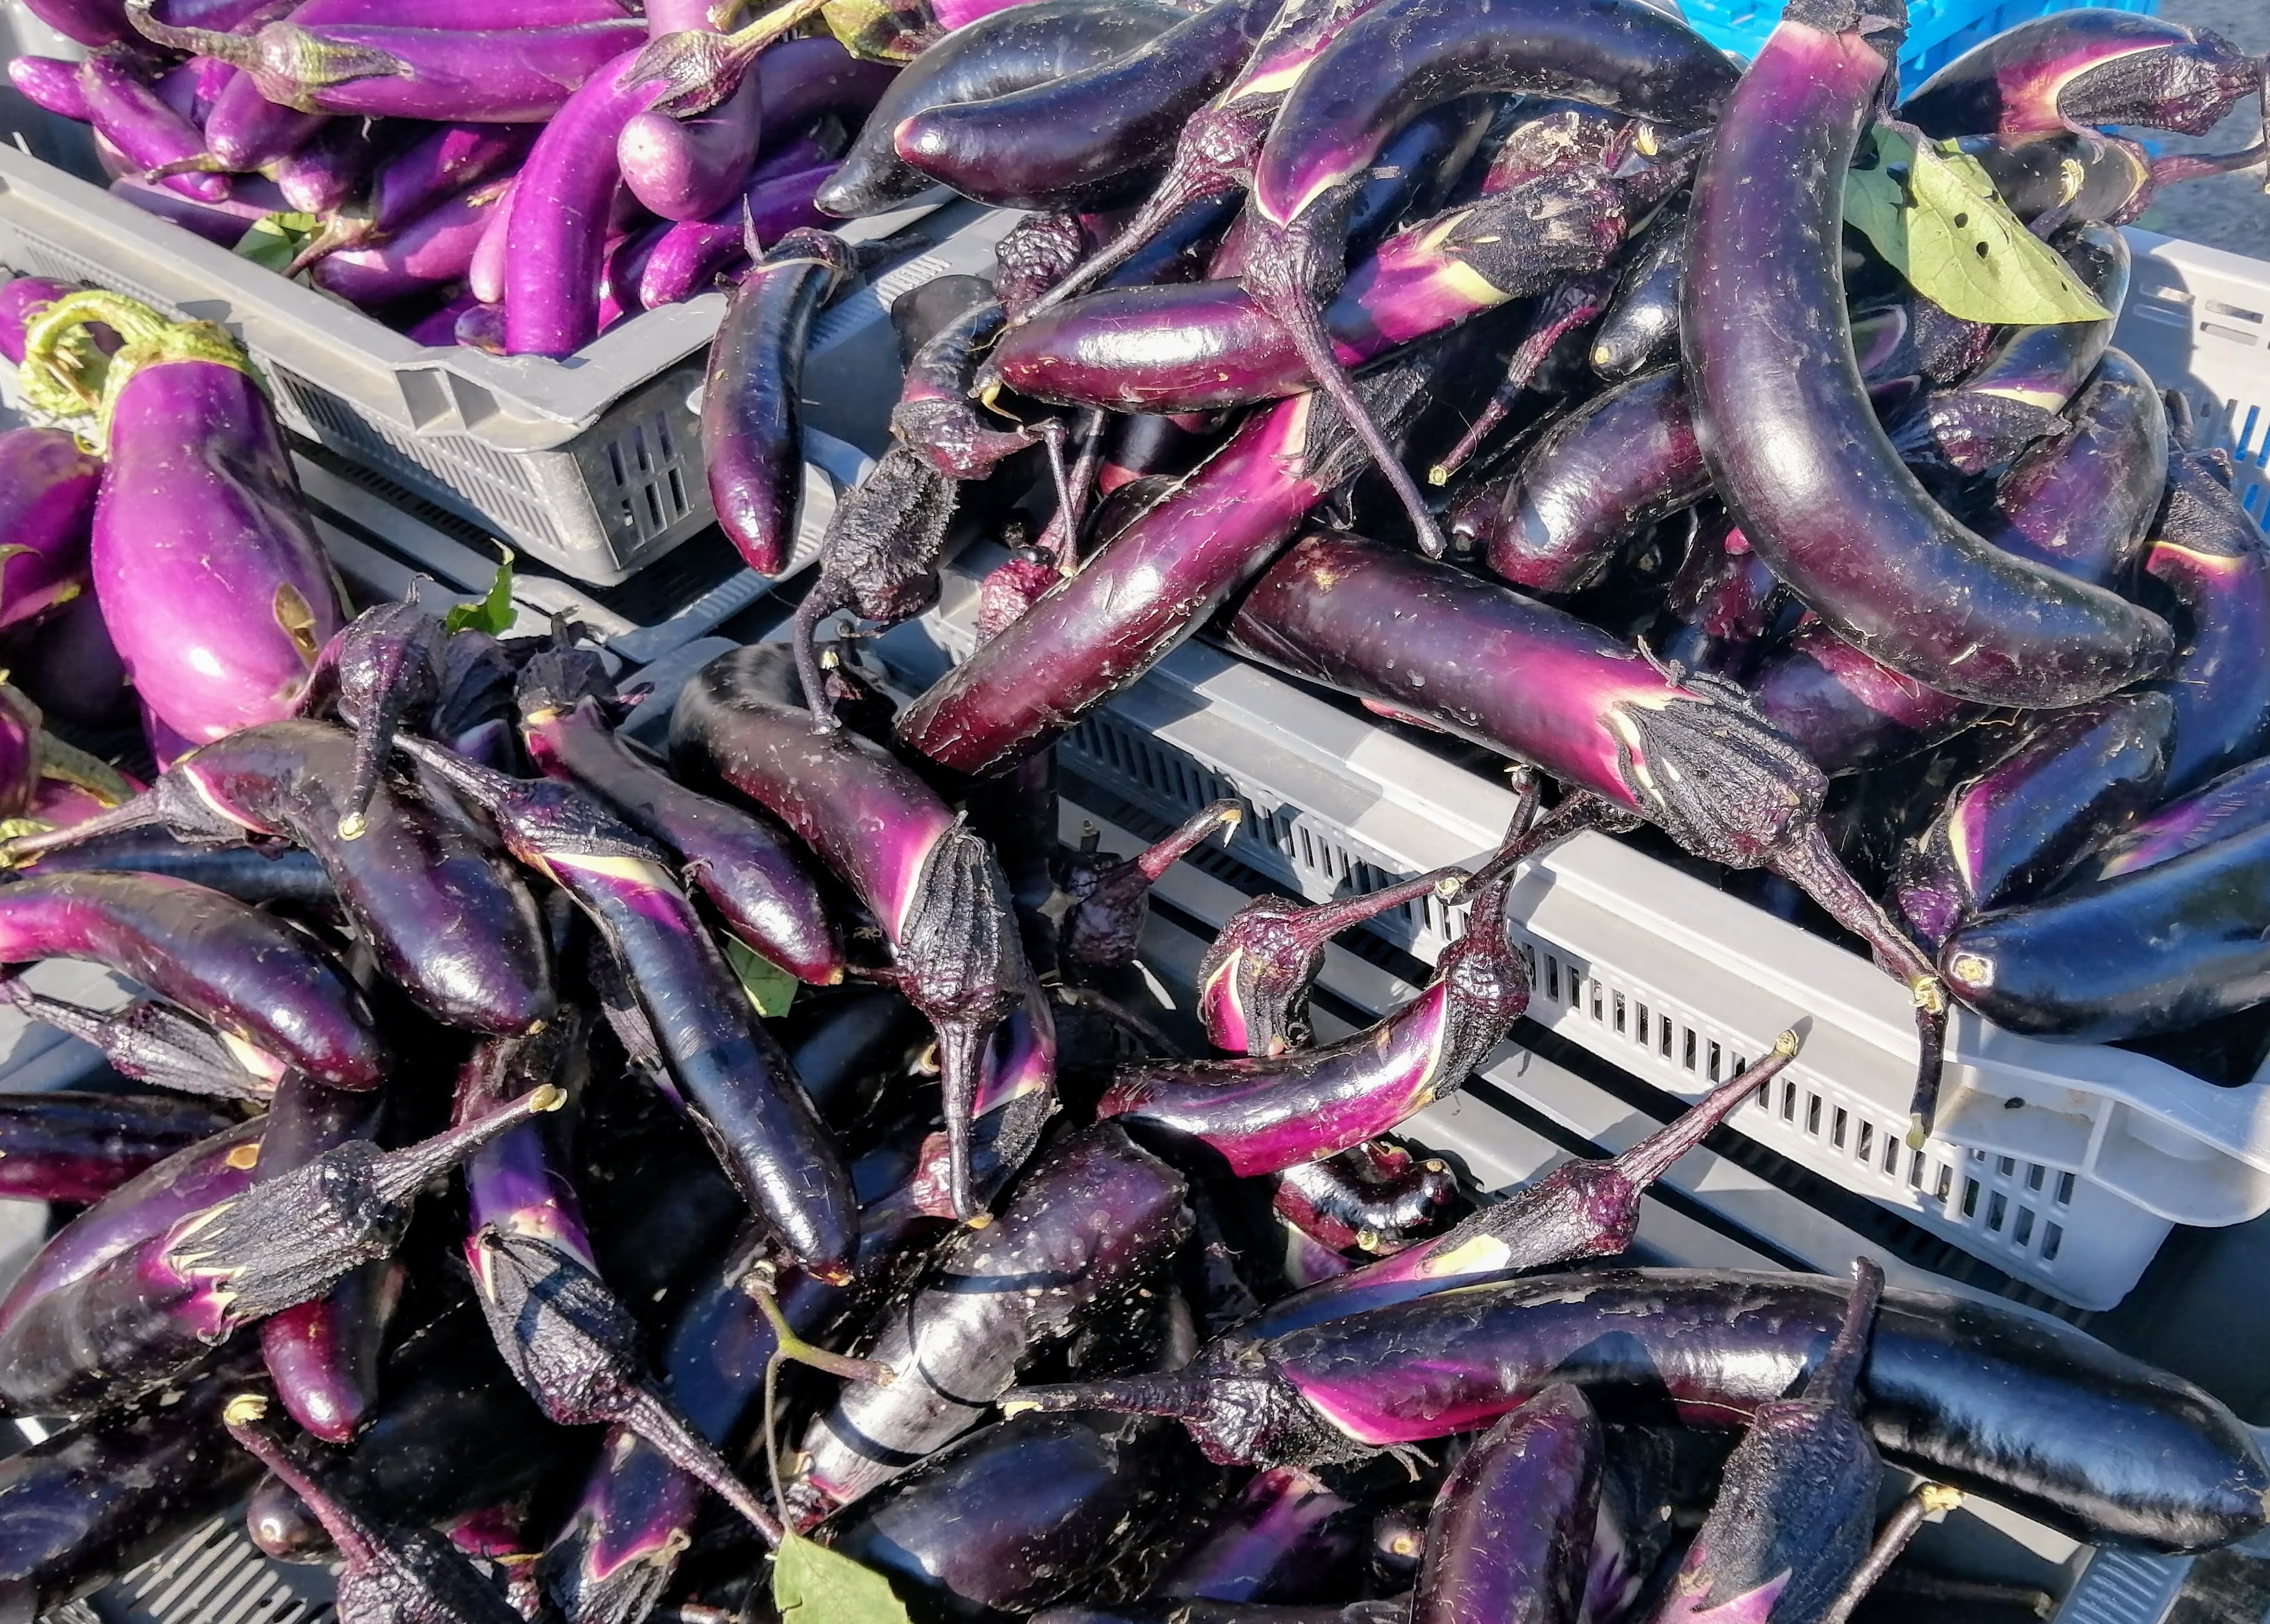  A display of piles of purple eggplants for sale. Photo by Paul Young.